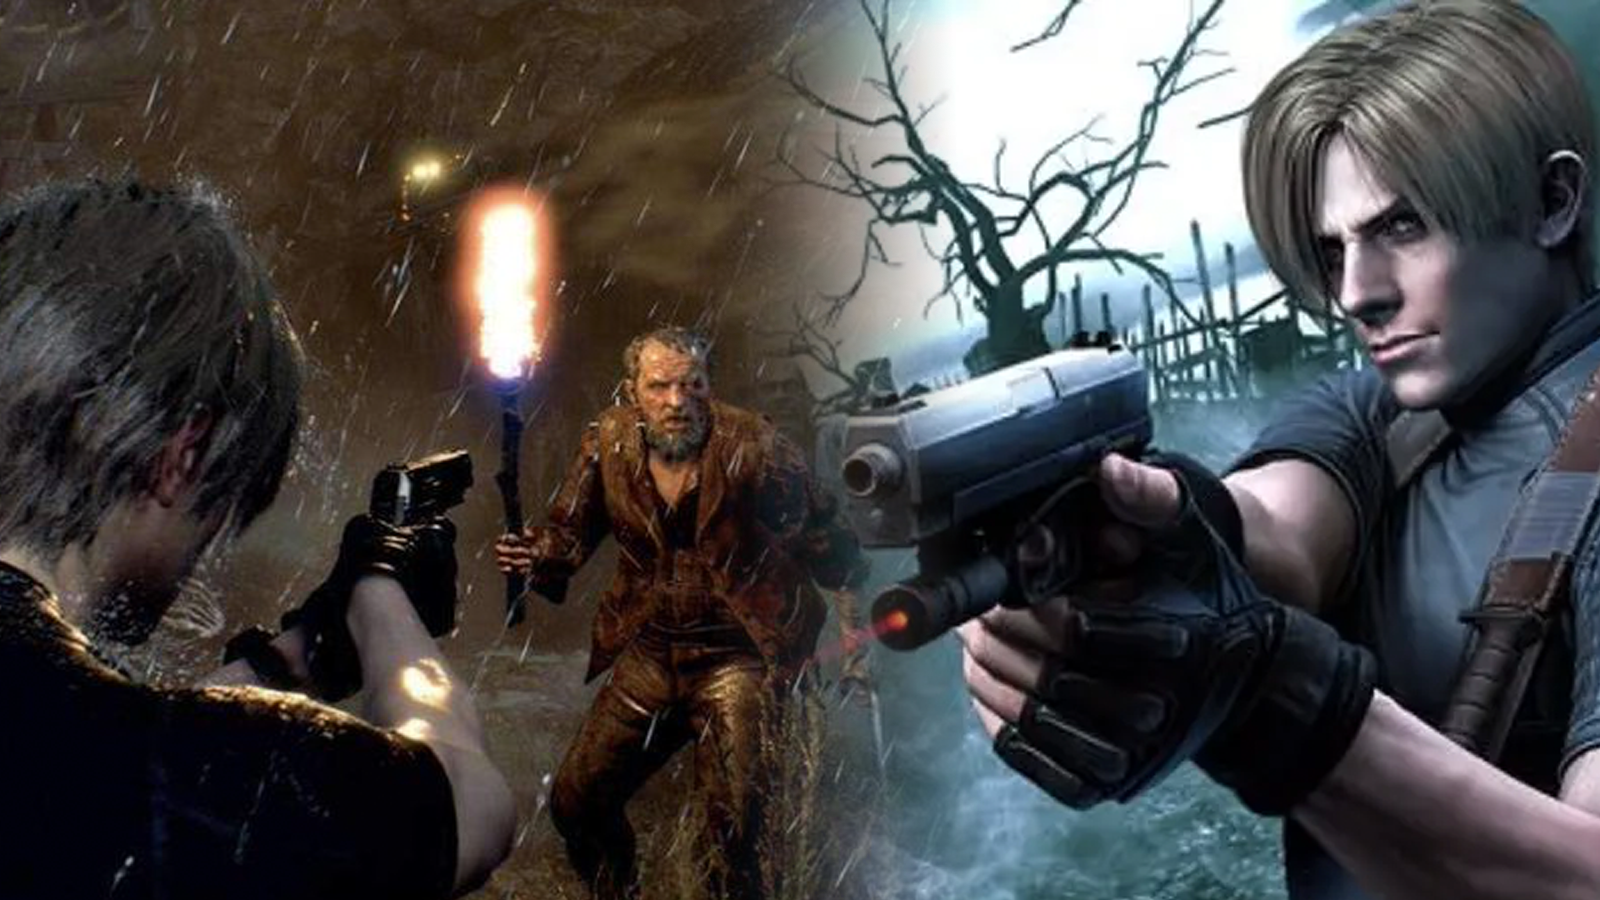 Resident Evil 4 Remake Rain Will Be Fixed in Day-One Patch